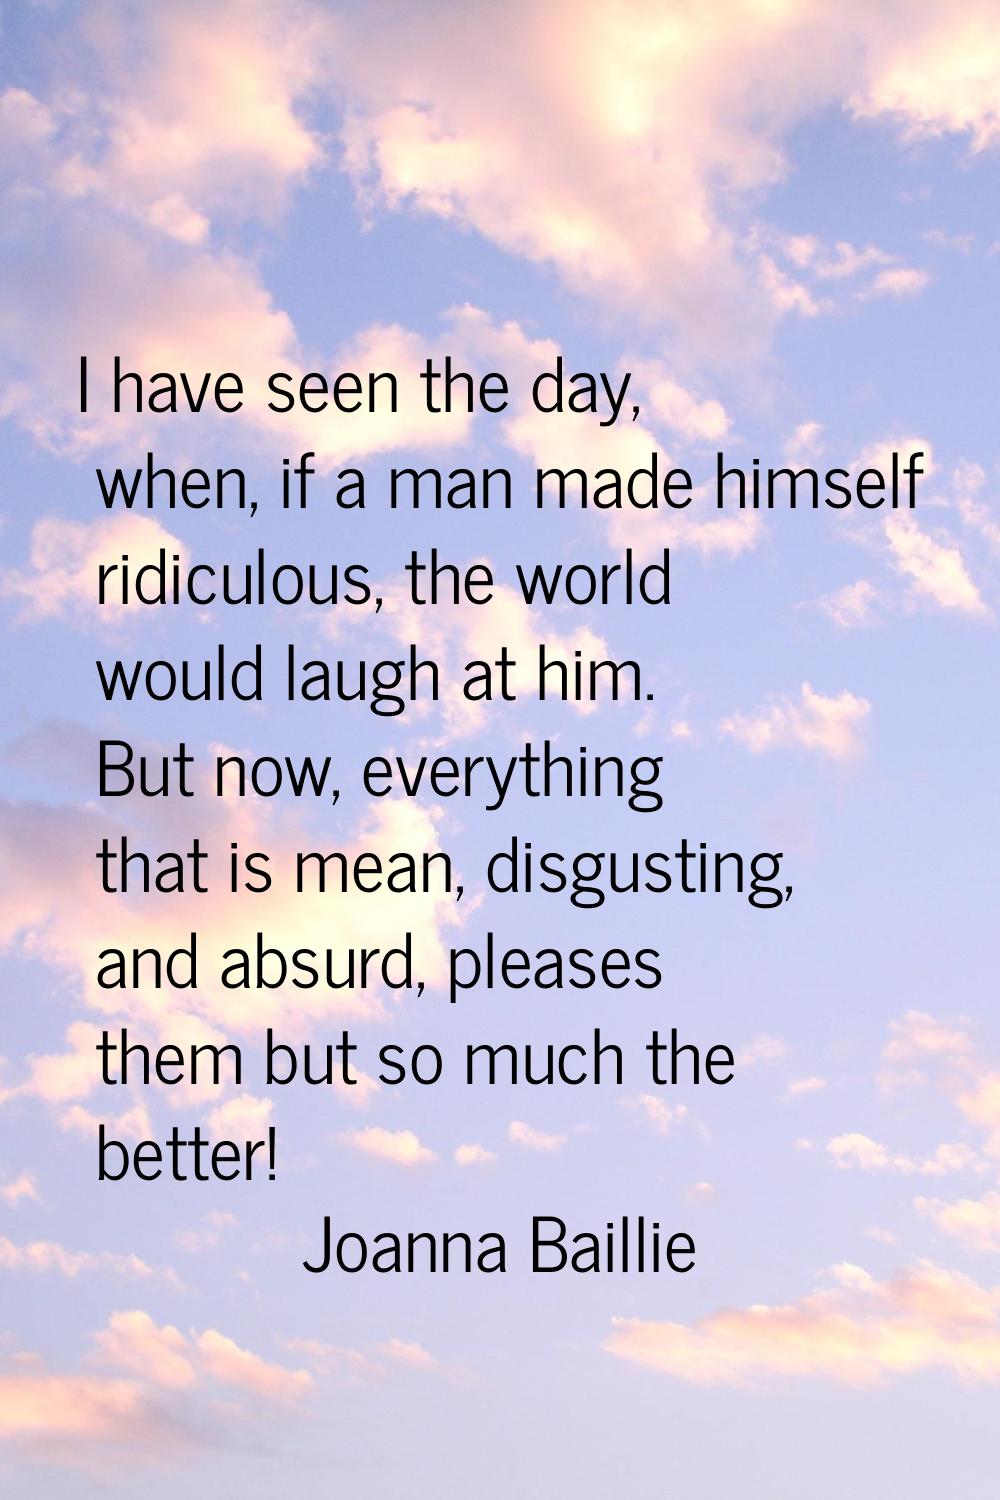 I have seen the day, when, if a man made himself ridiculous, the world would laugh at him. But now,